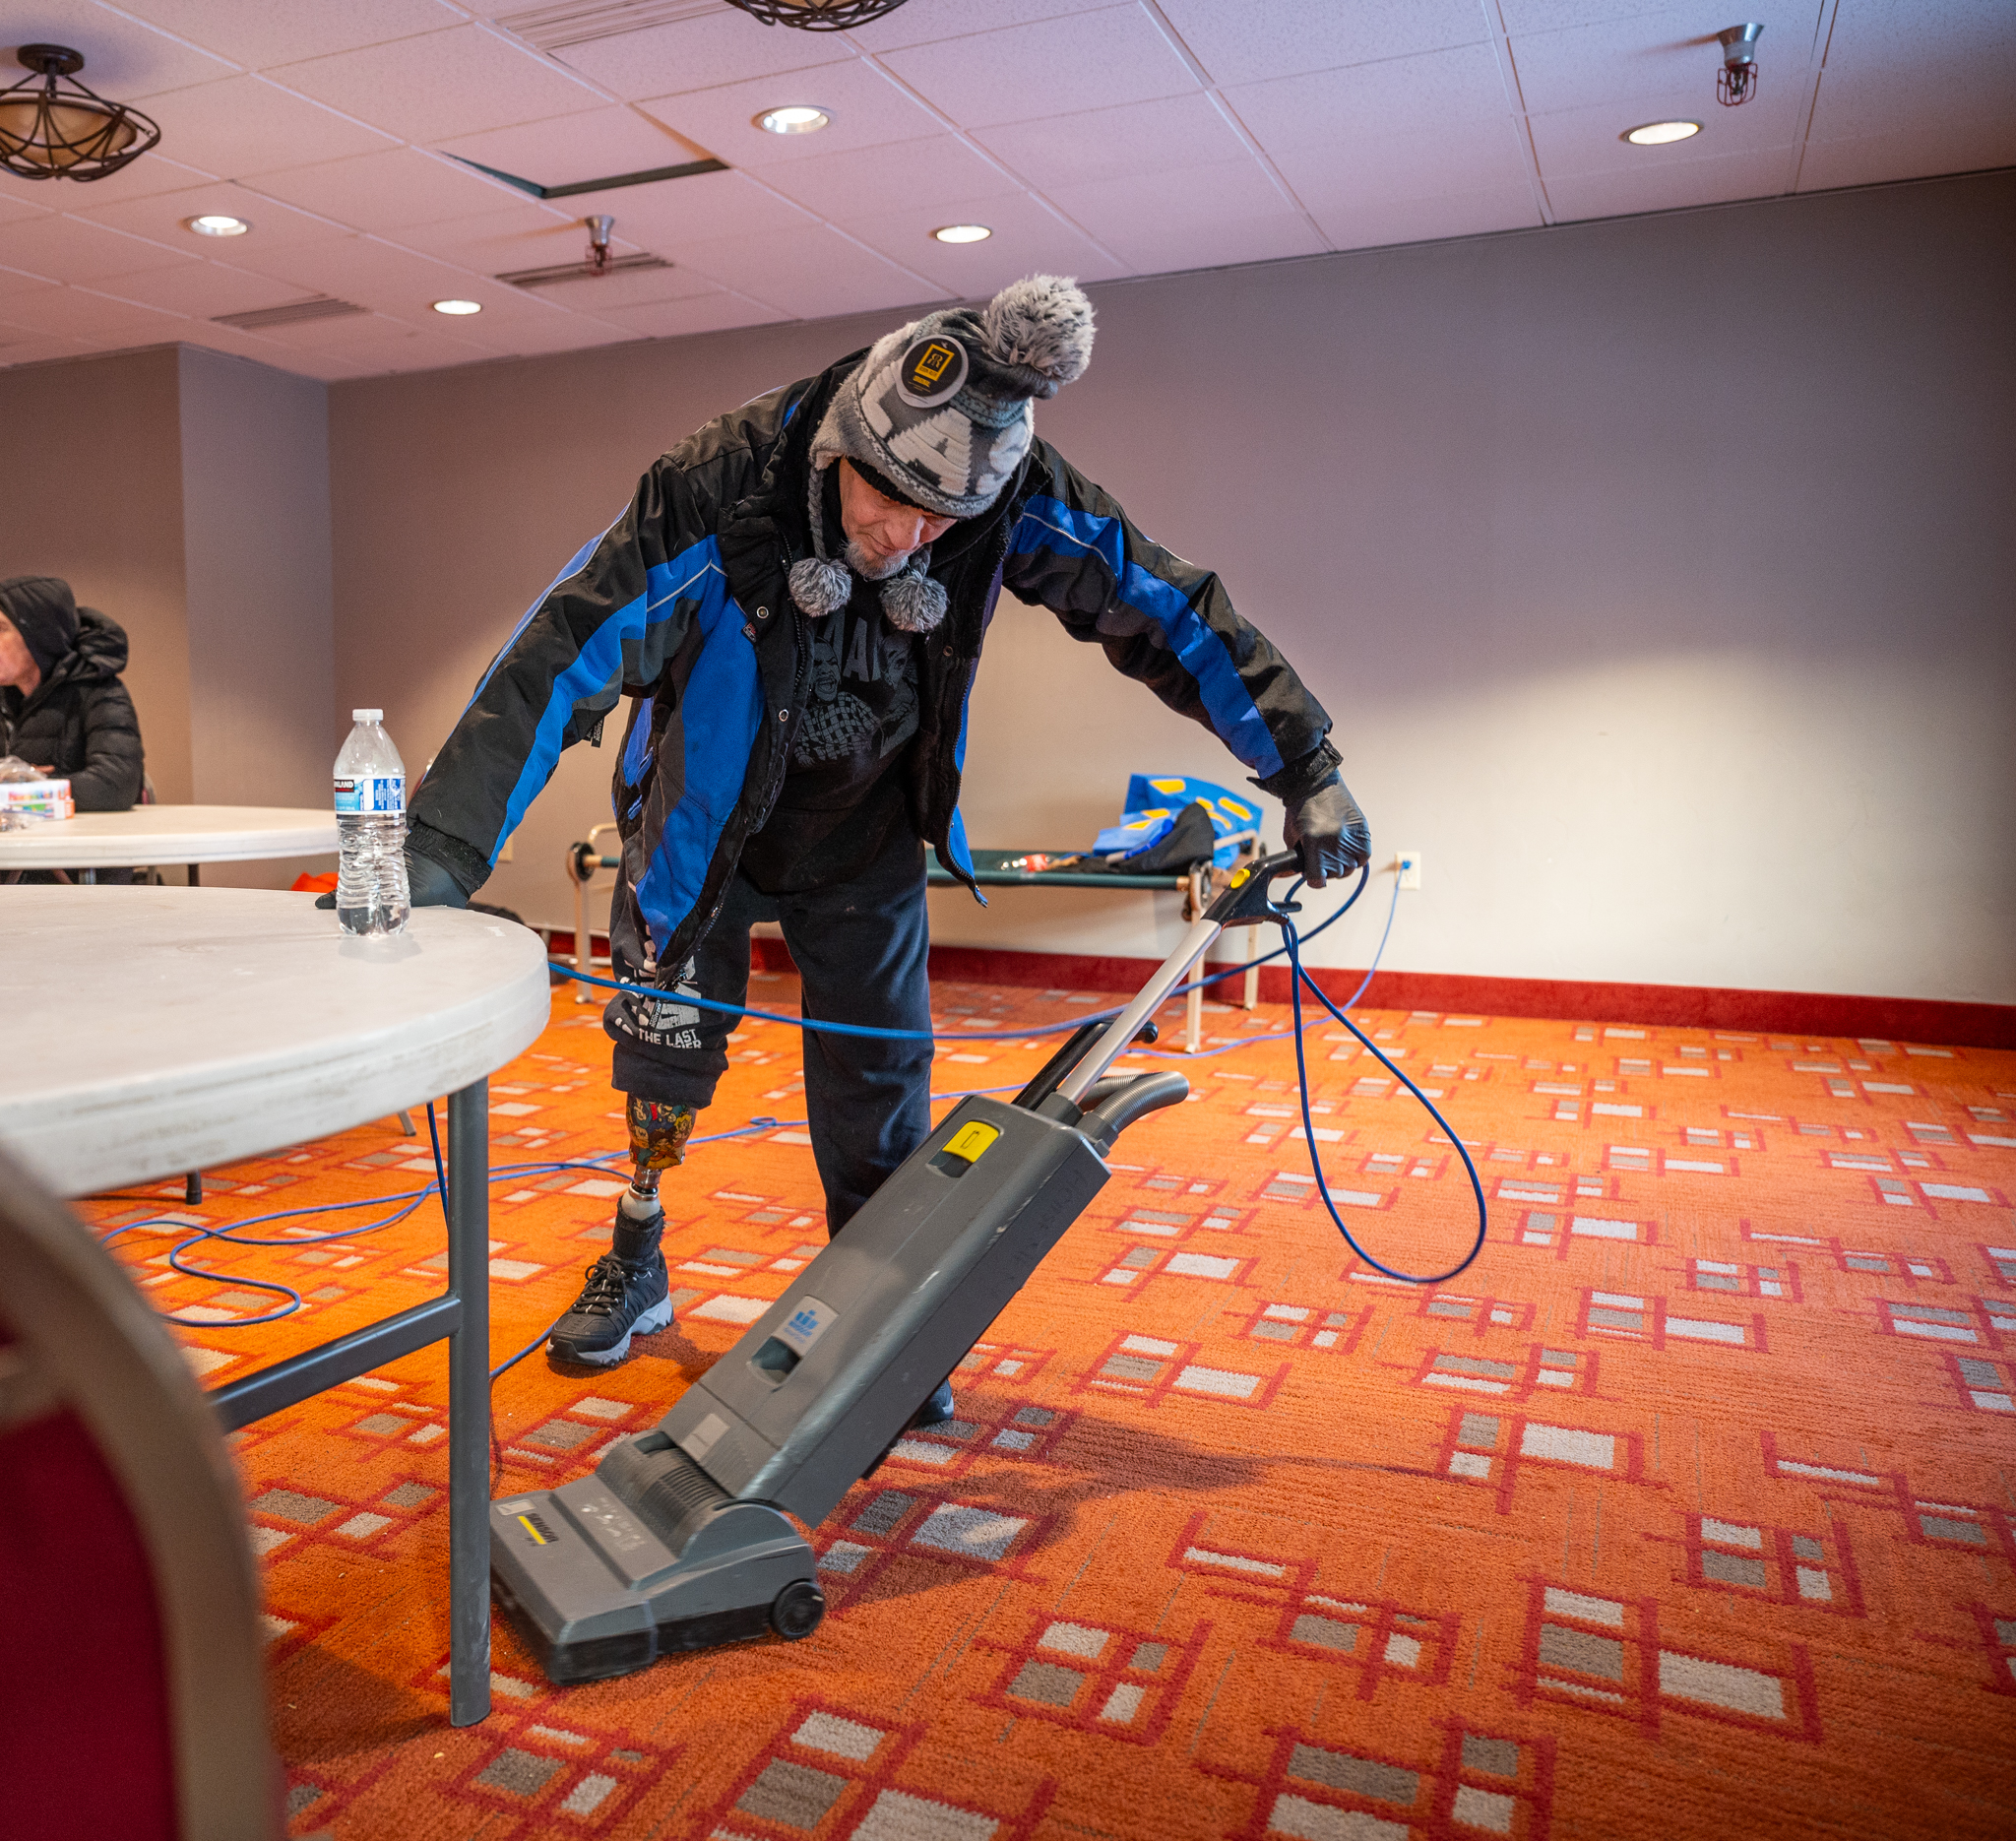 A man with a blue winter coat on vacuums the floor